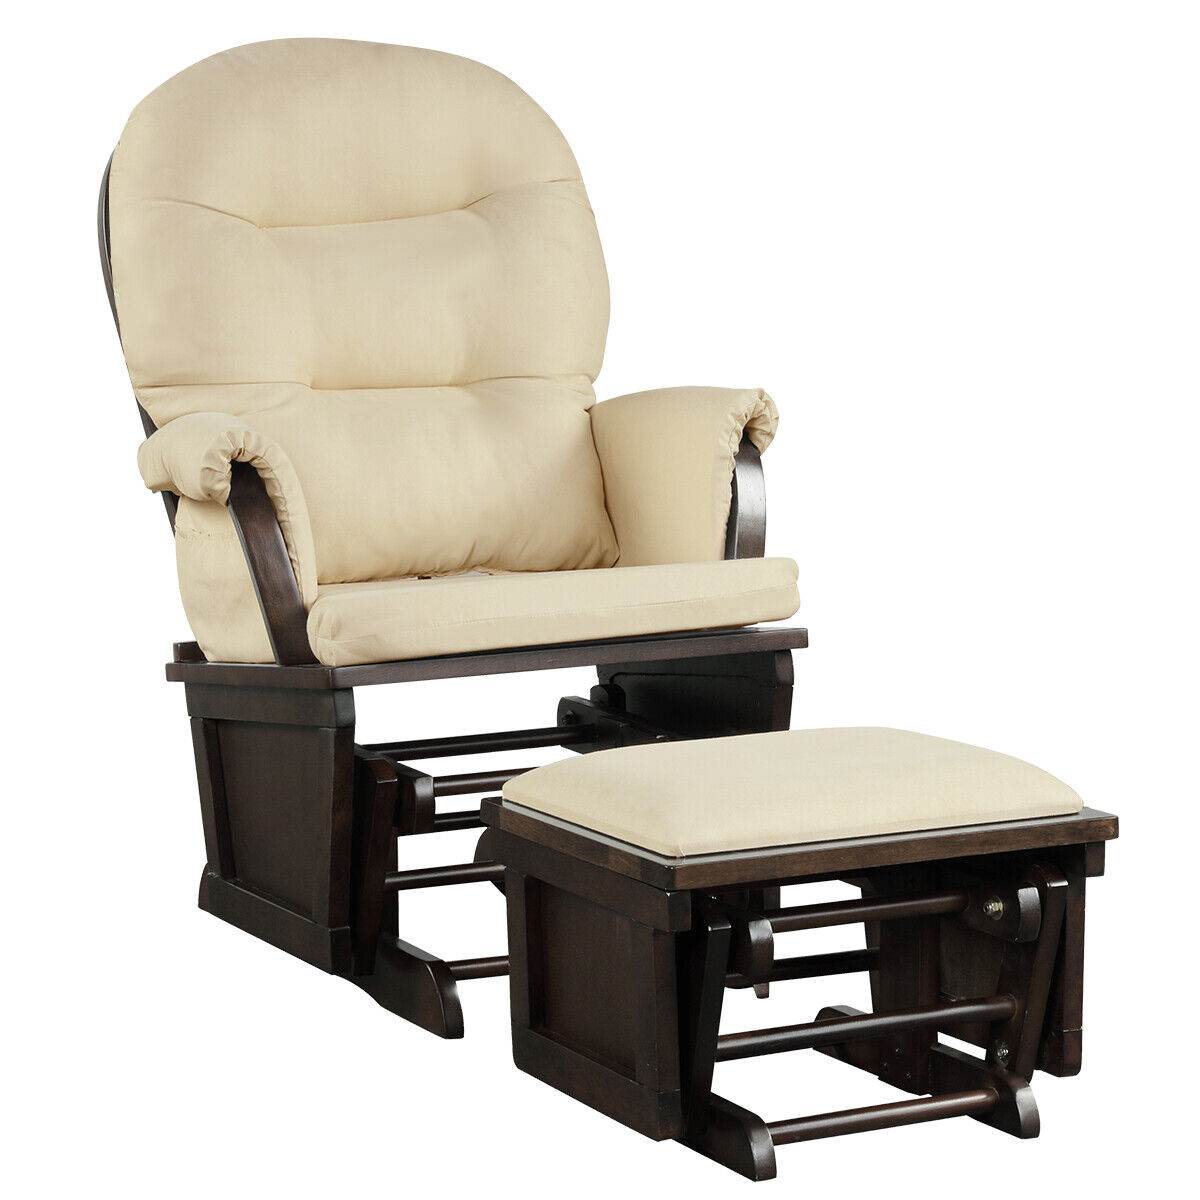 Baby Nursery Relax Rocker OFFicial Rocking Chair C w Fixed price for sale Ottoman Set Glider